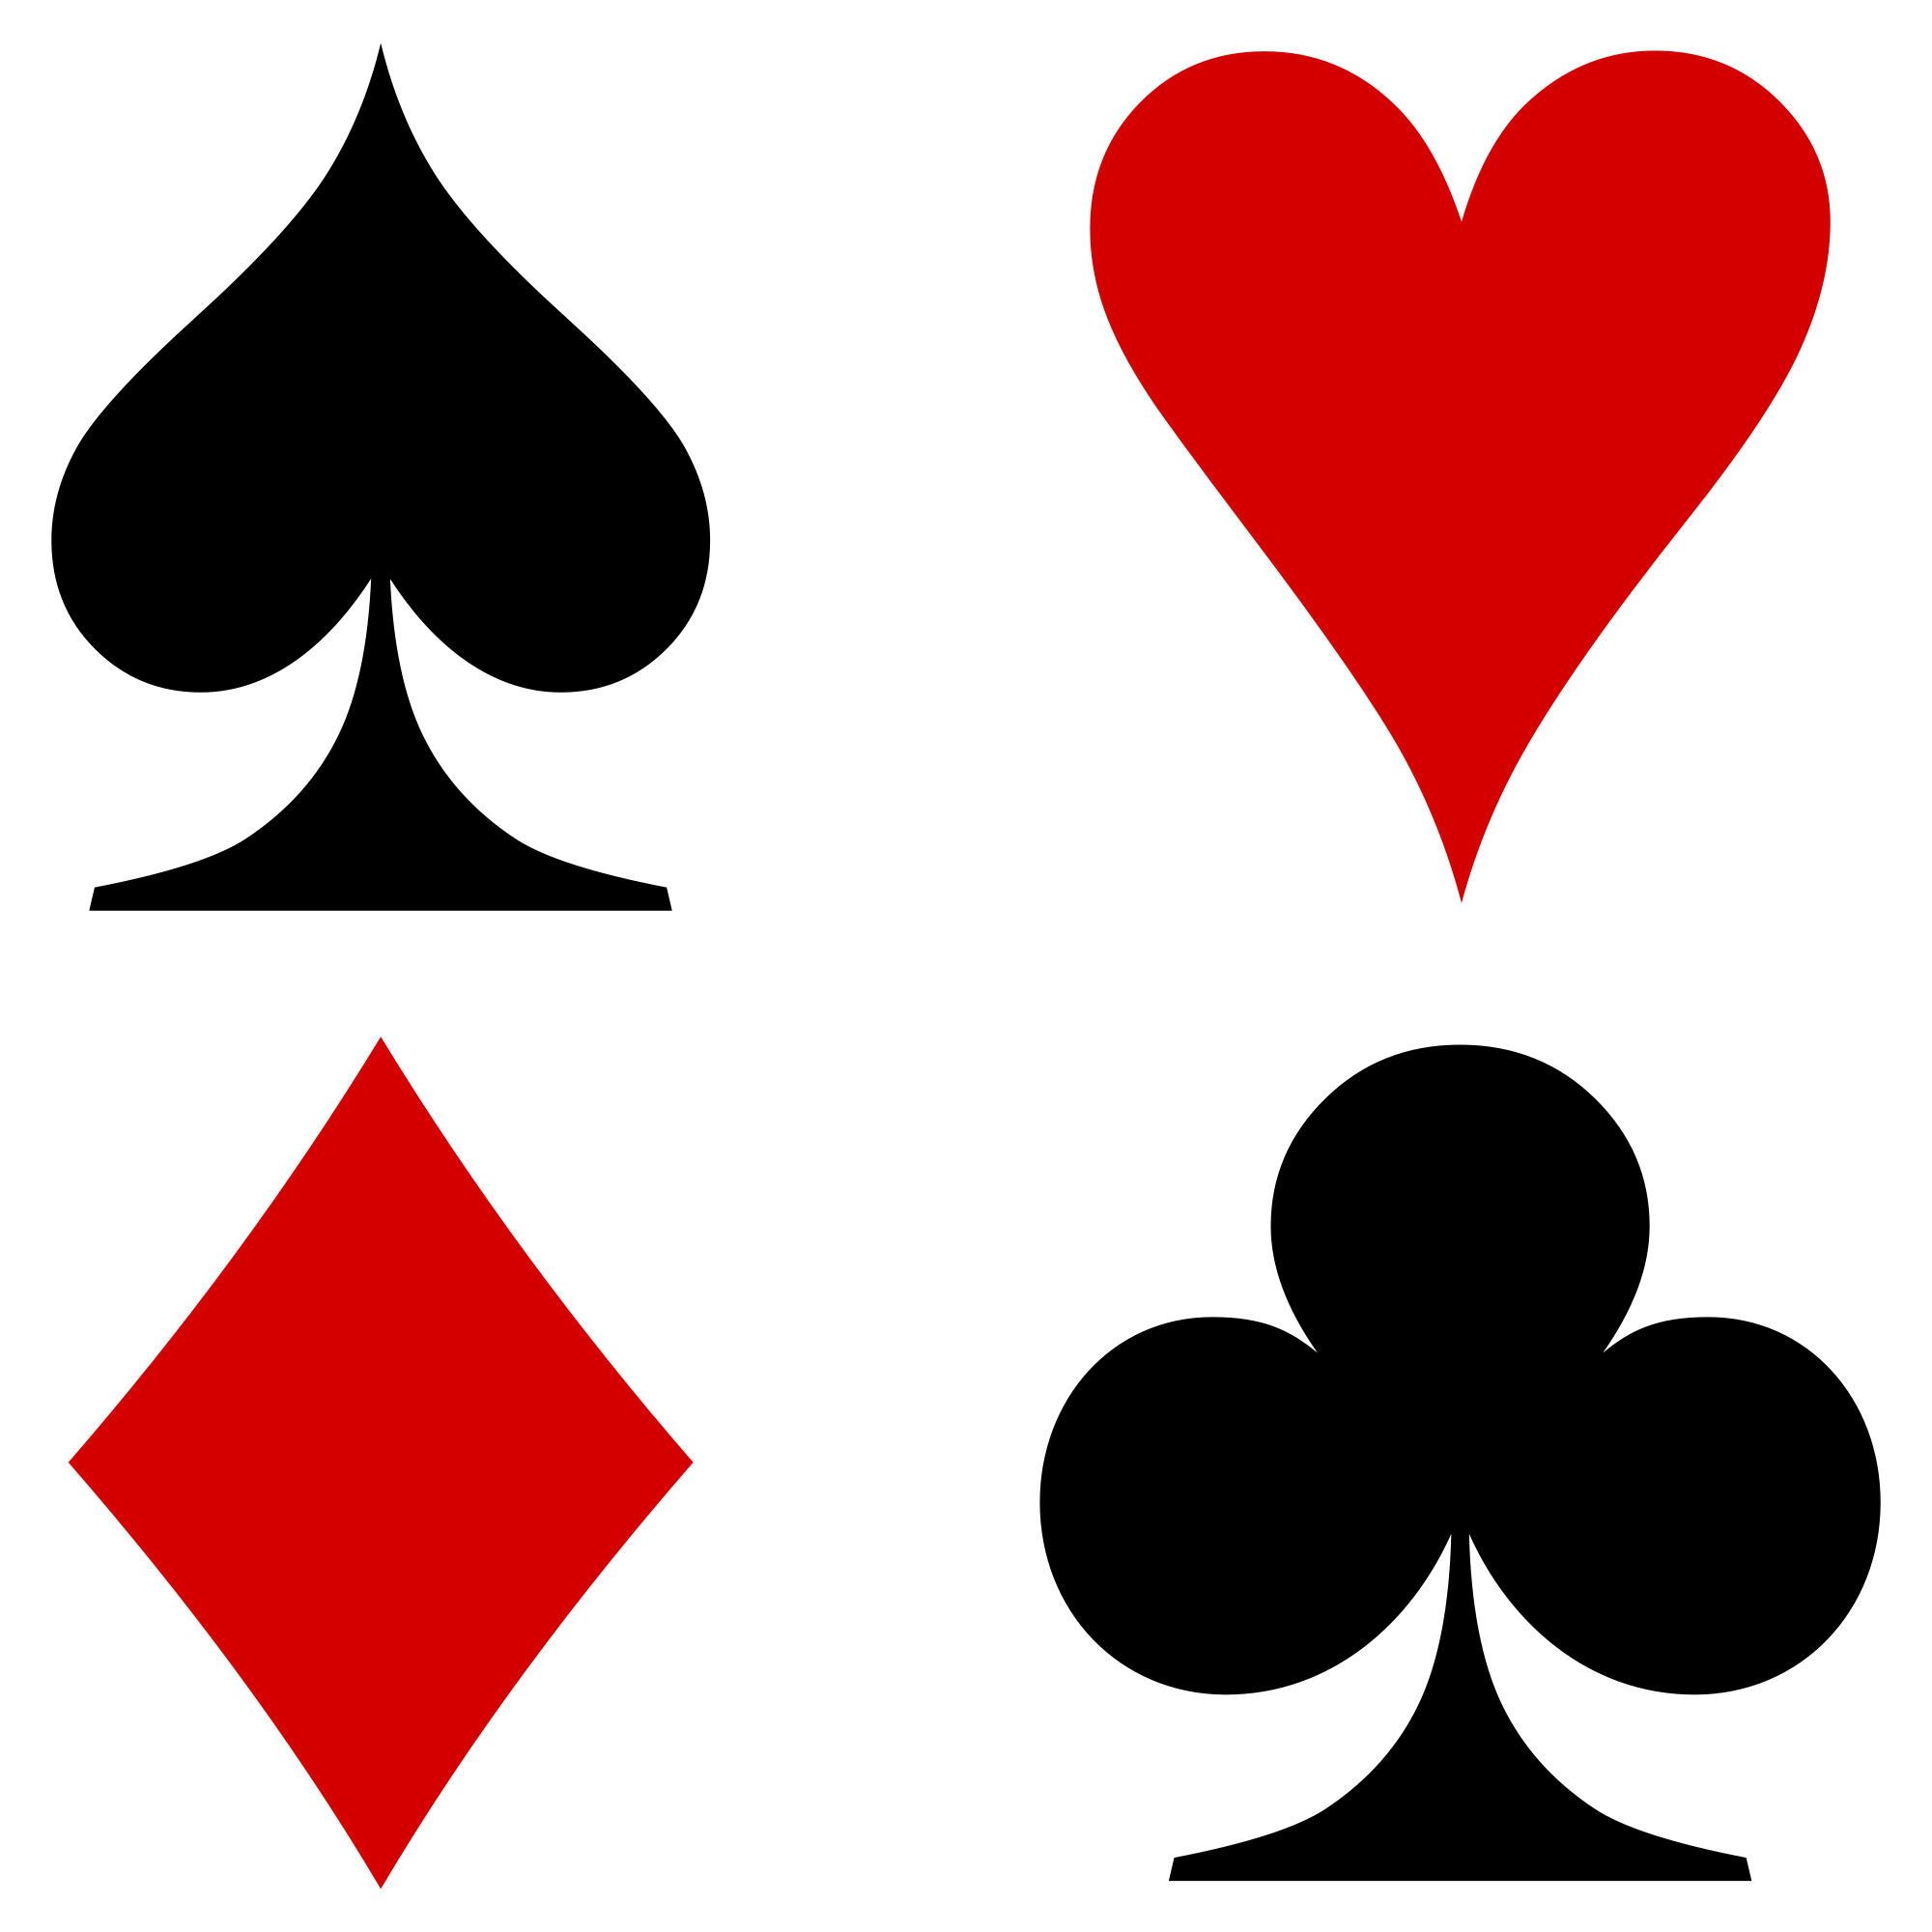 Heart In Deck Of Cards - ClipArt Best